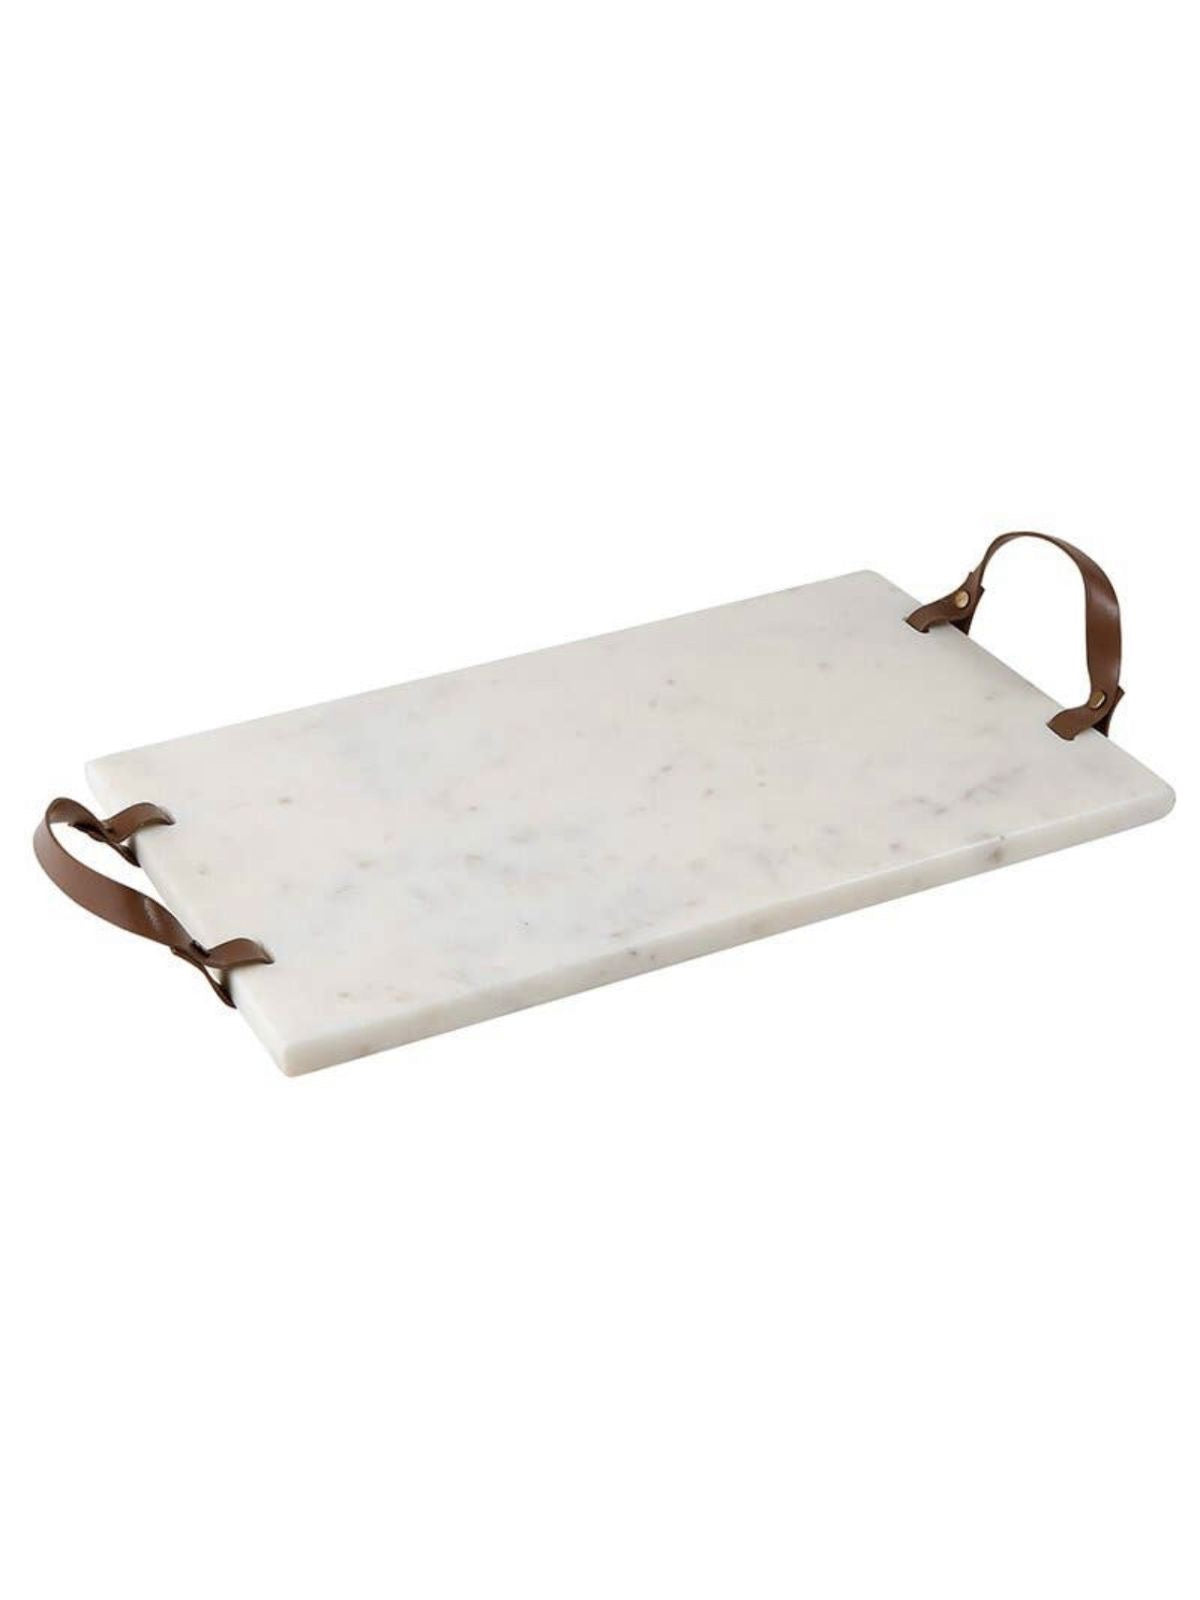 This 16 inch L Rectangular serving tray features white marble and brown leather handles for easy carrying. Stylish and completely versatile tray that can be used to elegantly display items around the kitchen or around the house. Sold by KYA Home Decor